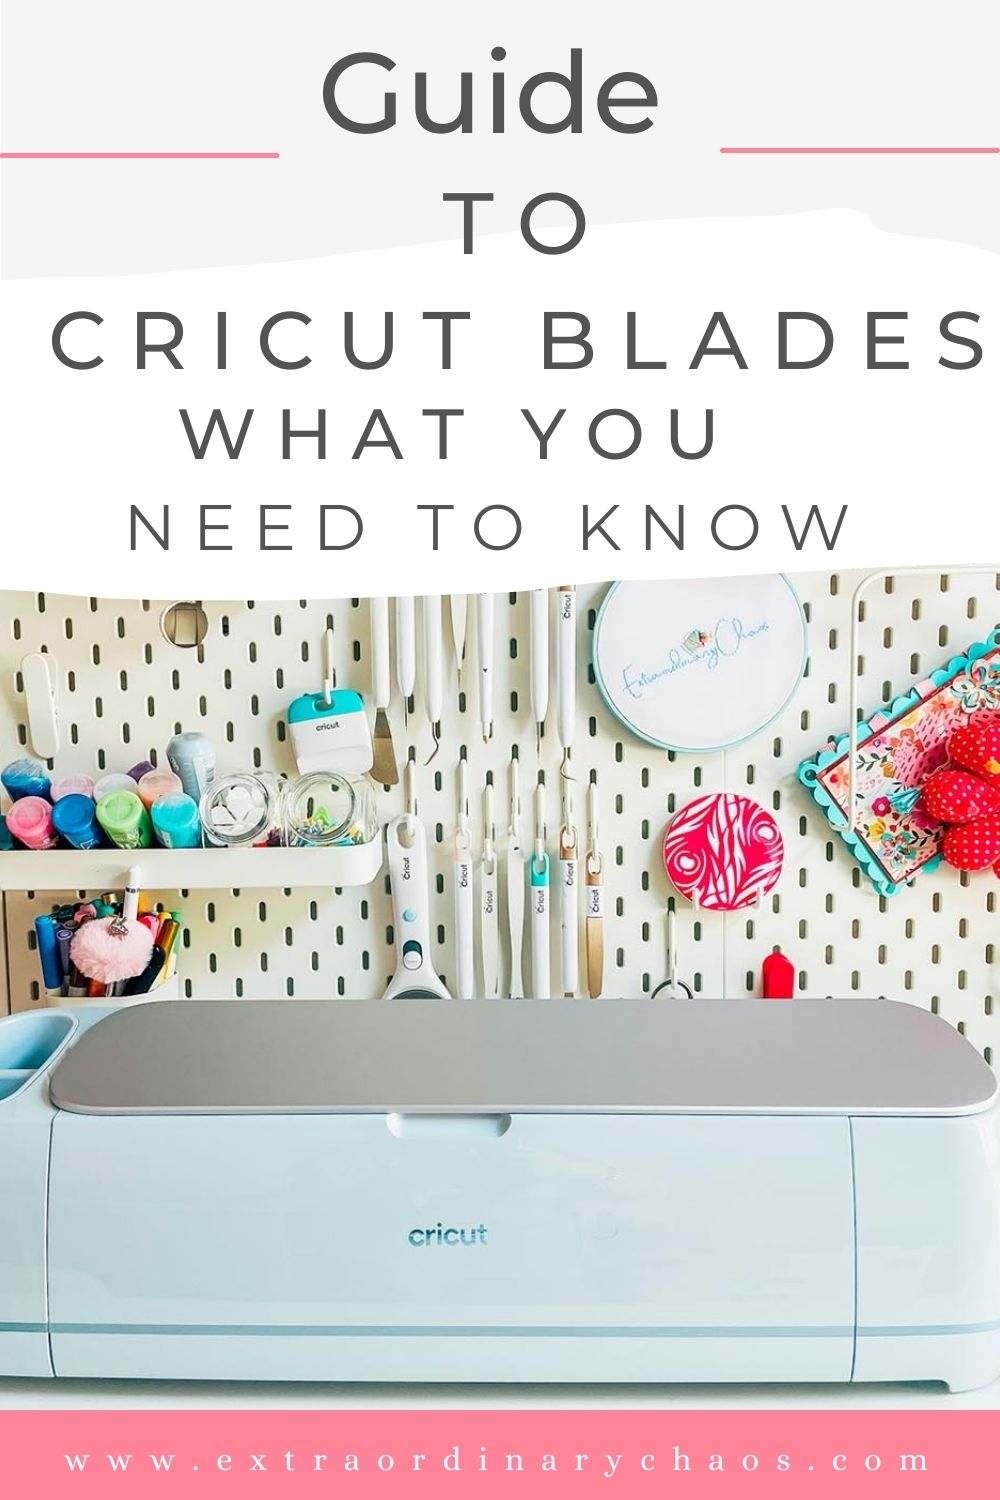 Complete guide to Cricut Blades, everything you need to know